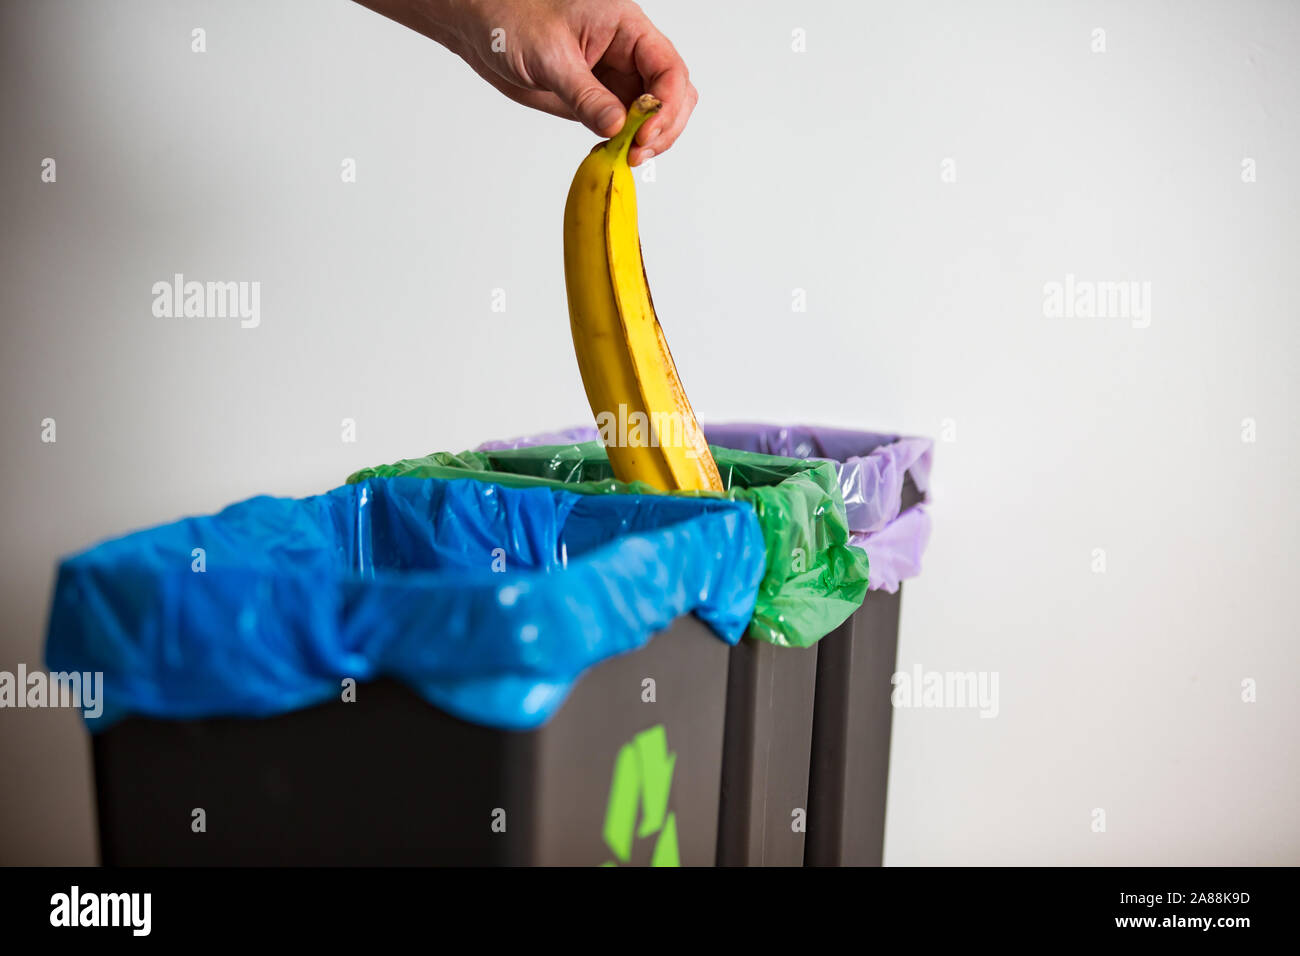 Hand putting banana peel in recycling bio bin. Person in a house kitchen separating waste. Black trash bin with green bag and recycling symbol. Stock Photo